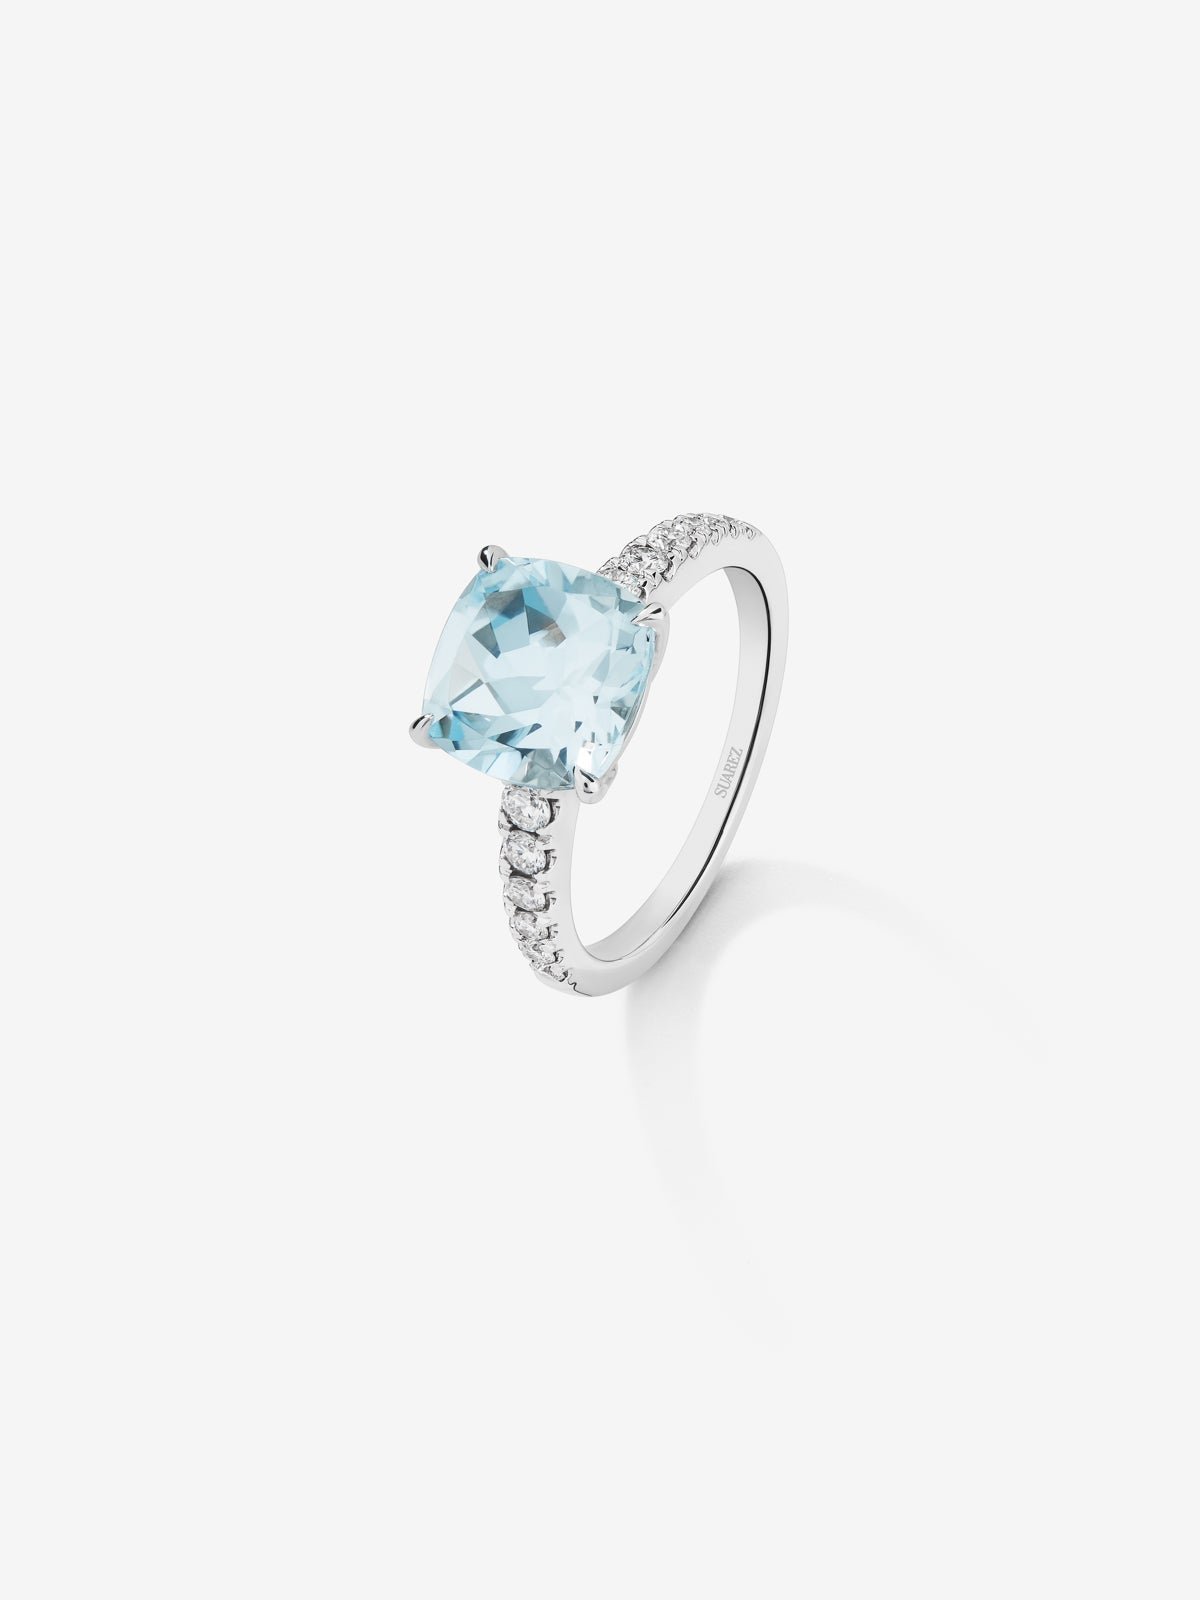 18K white gold ring with cushion-cut sky blue topaz of 3.72 cts and 12 brilliant-cut diamonds with a total of 0.3 cts